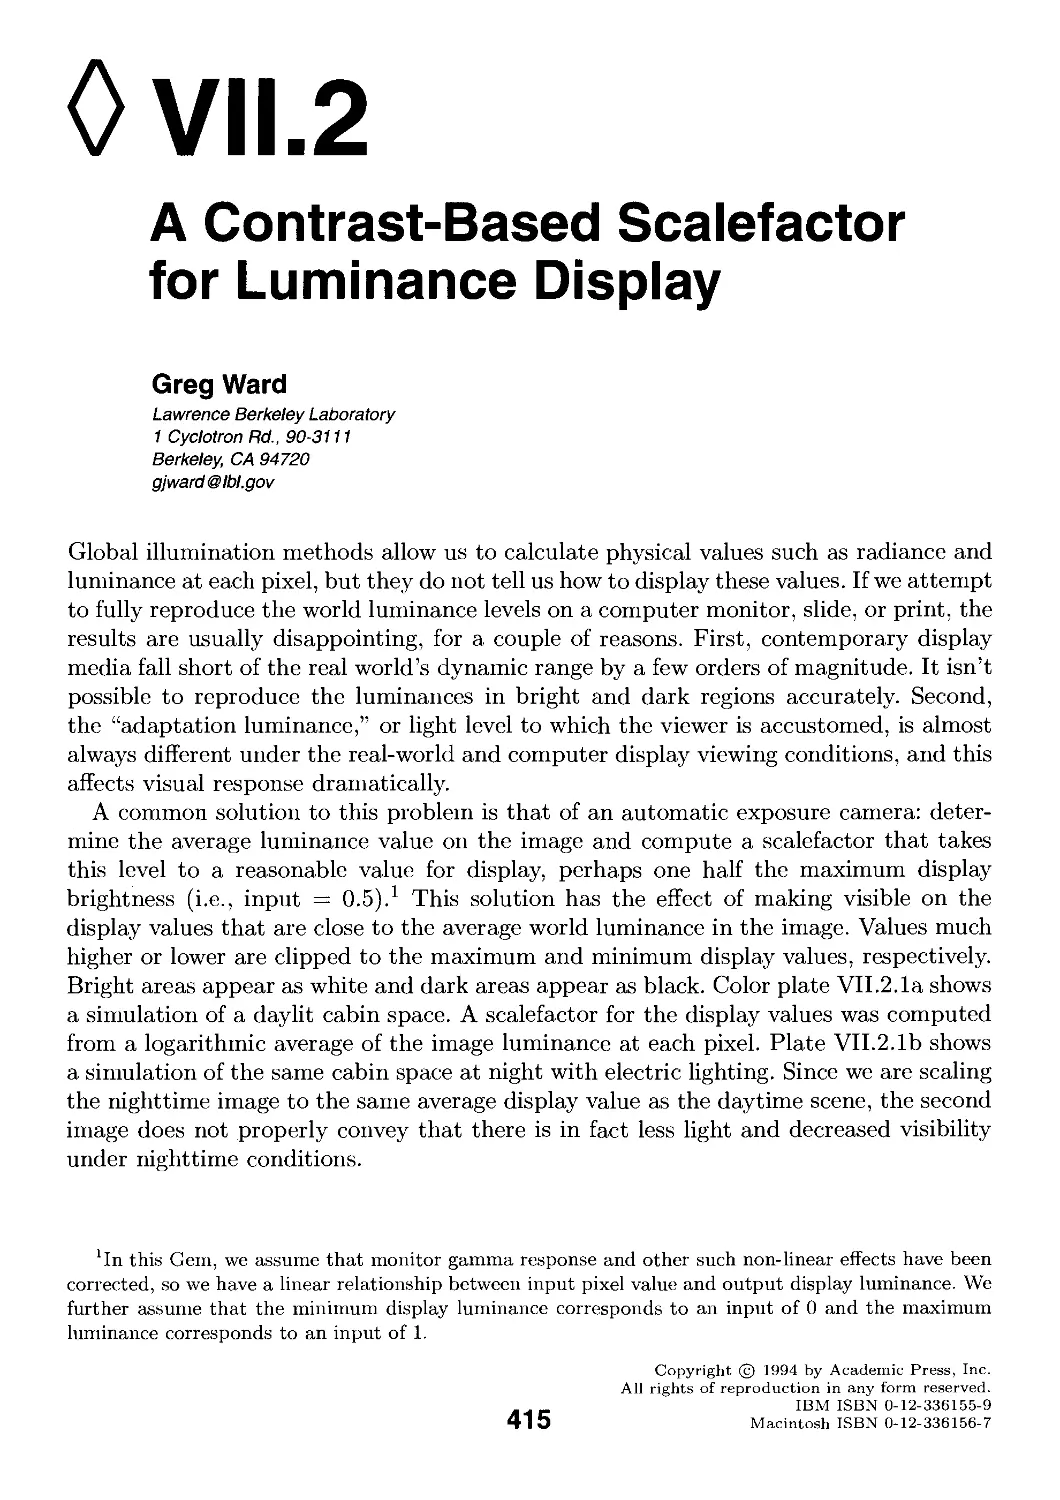 VII.2. A Contrast-Based Scalefactor for Luminance Display by Greg Ward